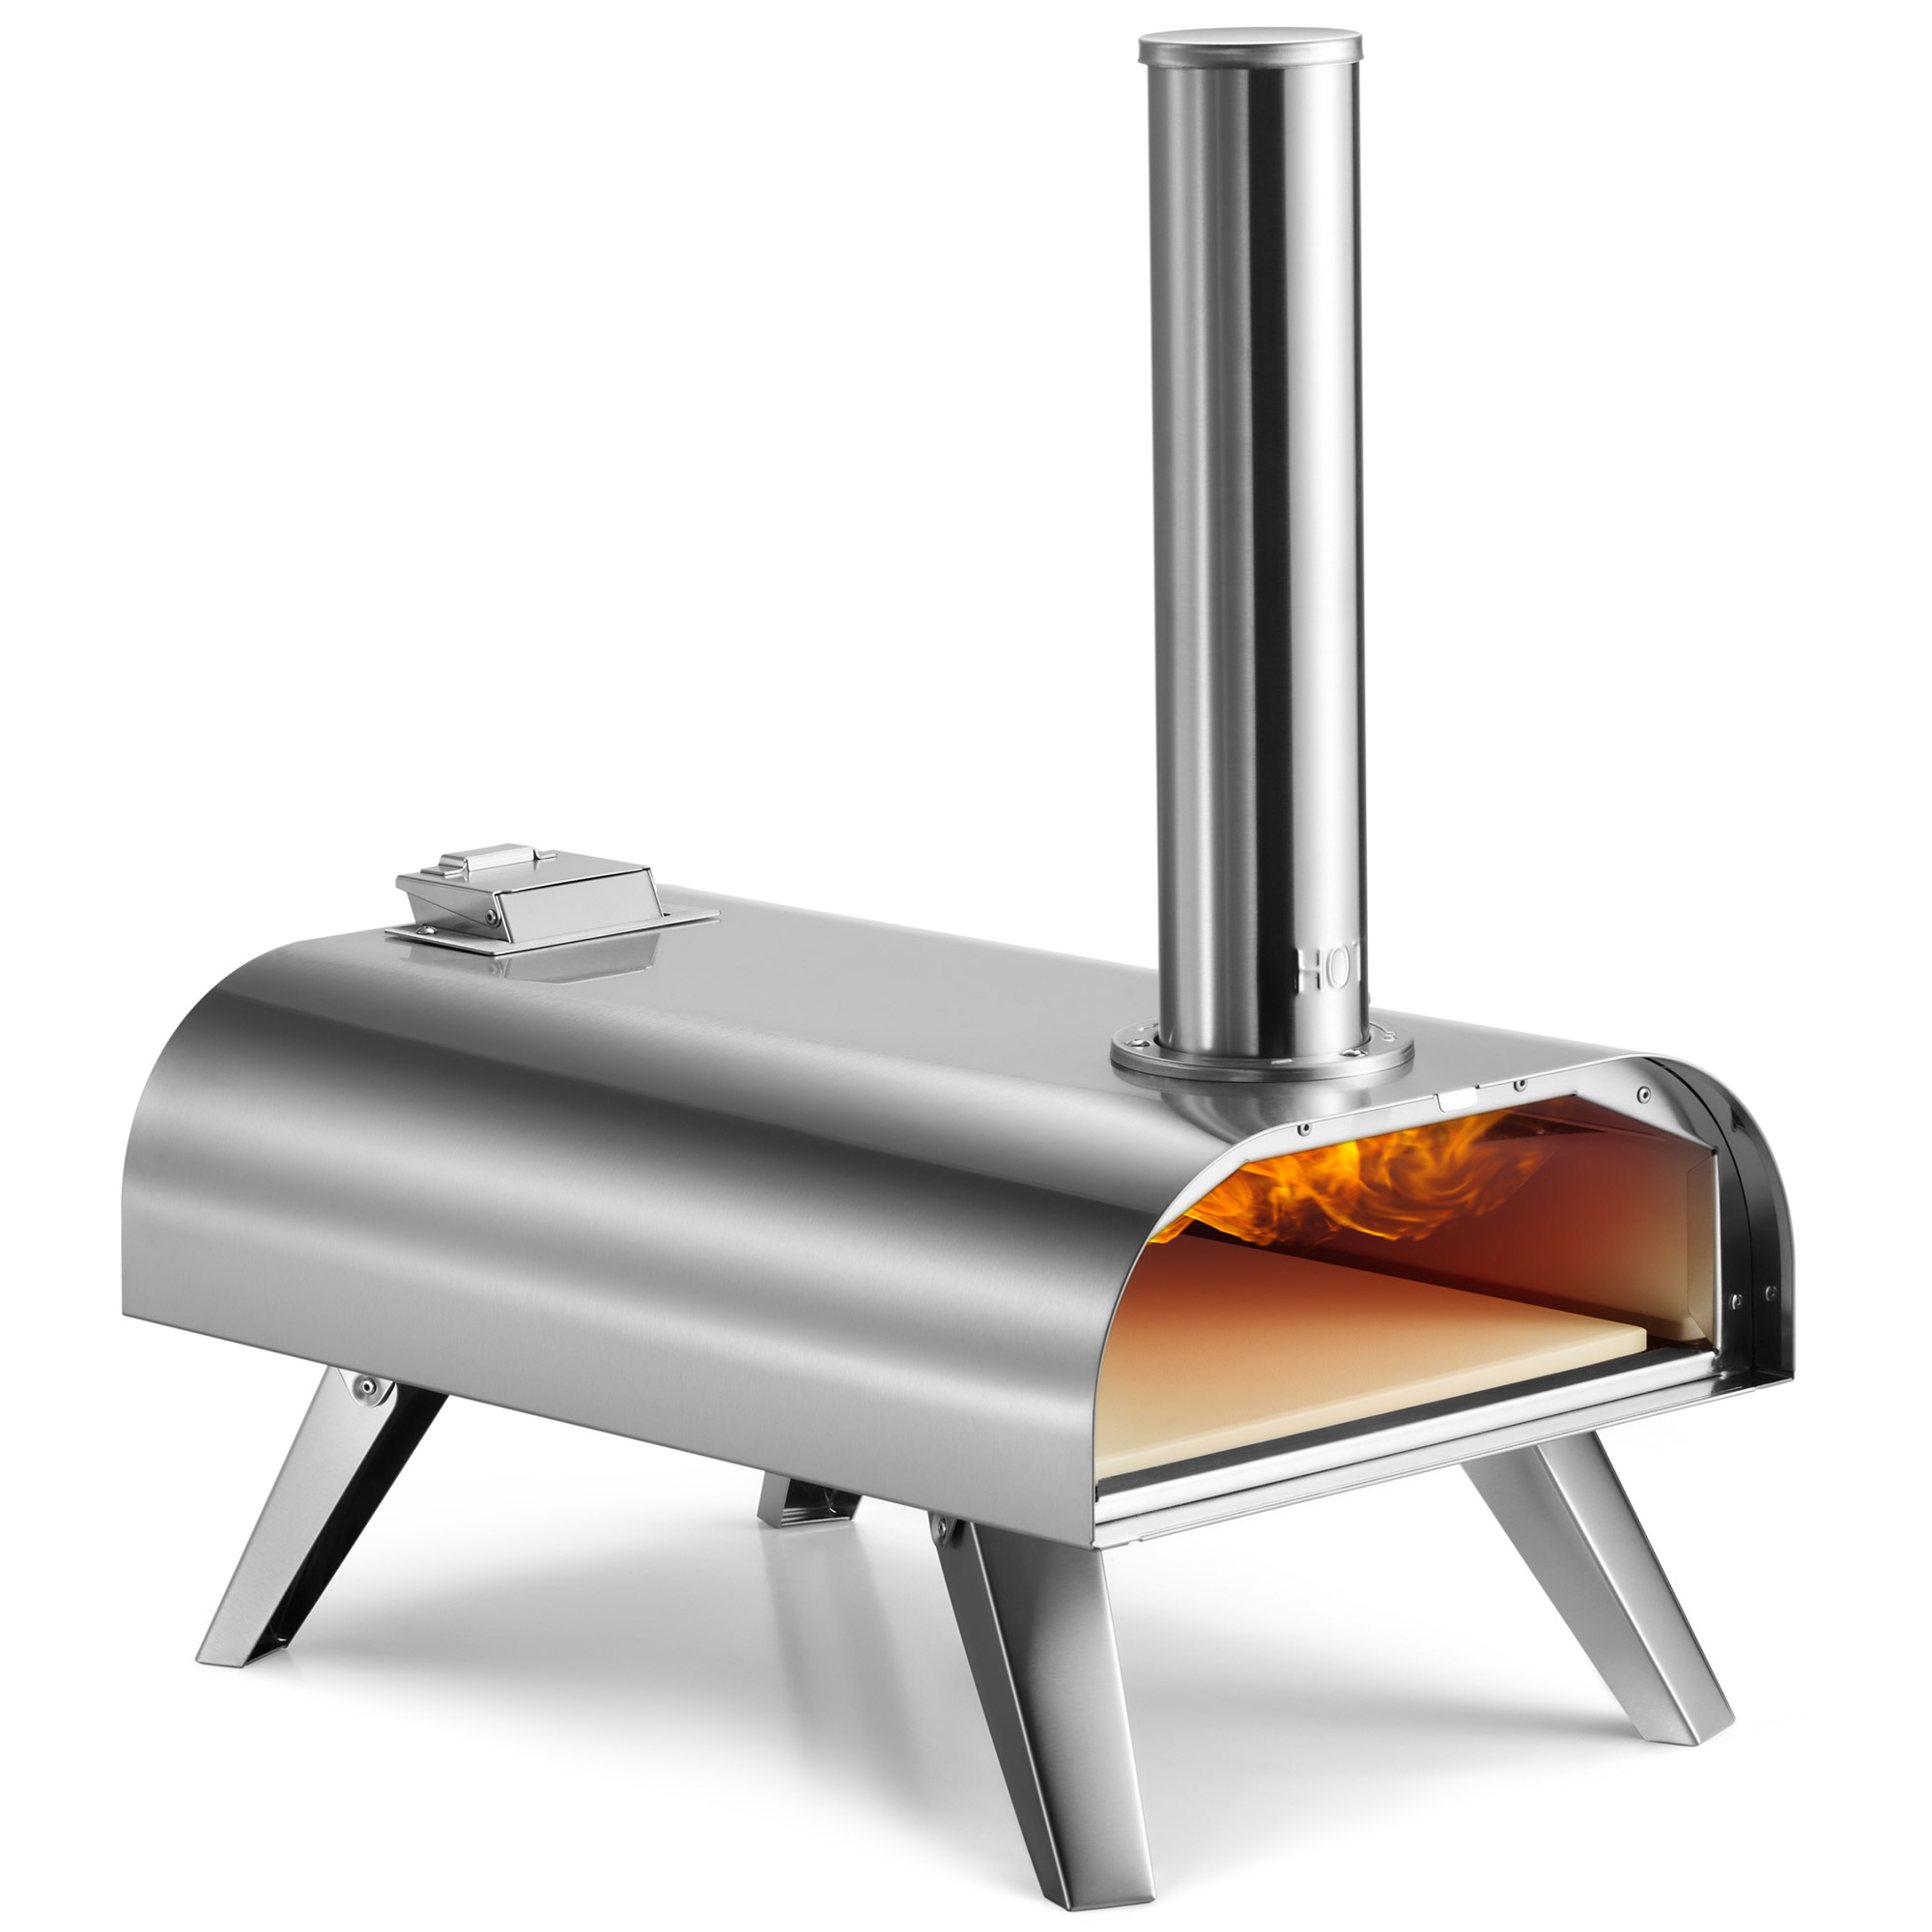 VonHaus Pizza Oven Outdoor for Tabletop, Pizza Stone Inc – for Up to 12” Pizzas